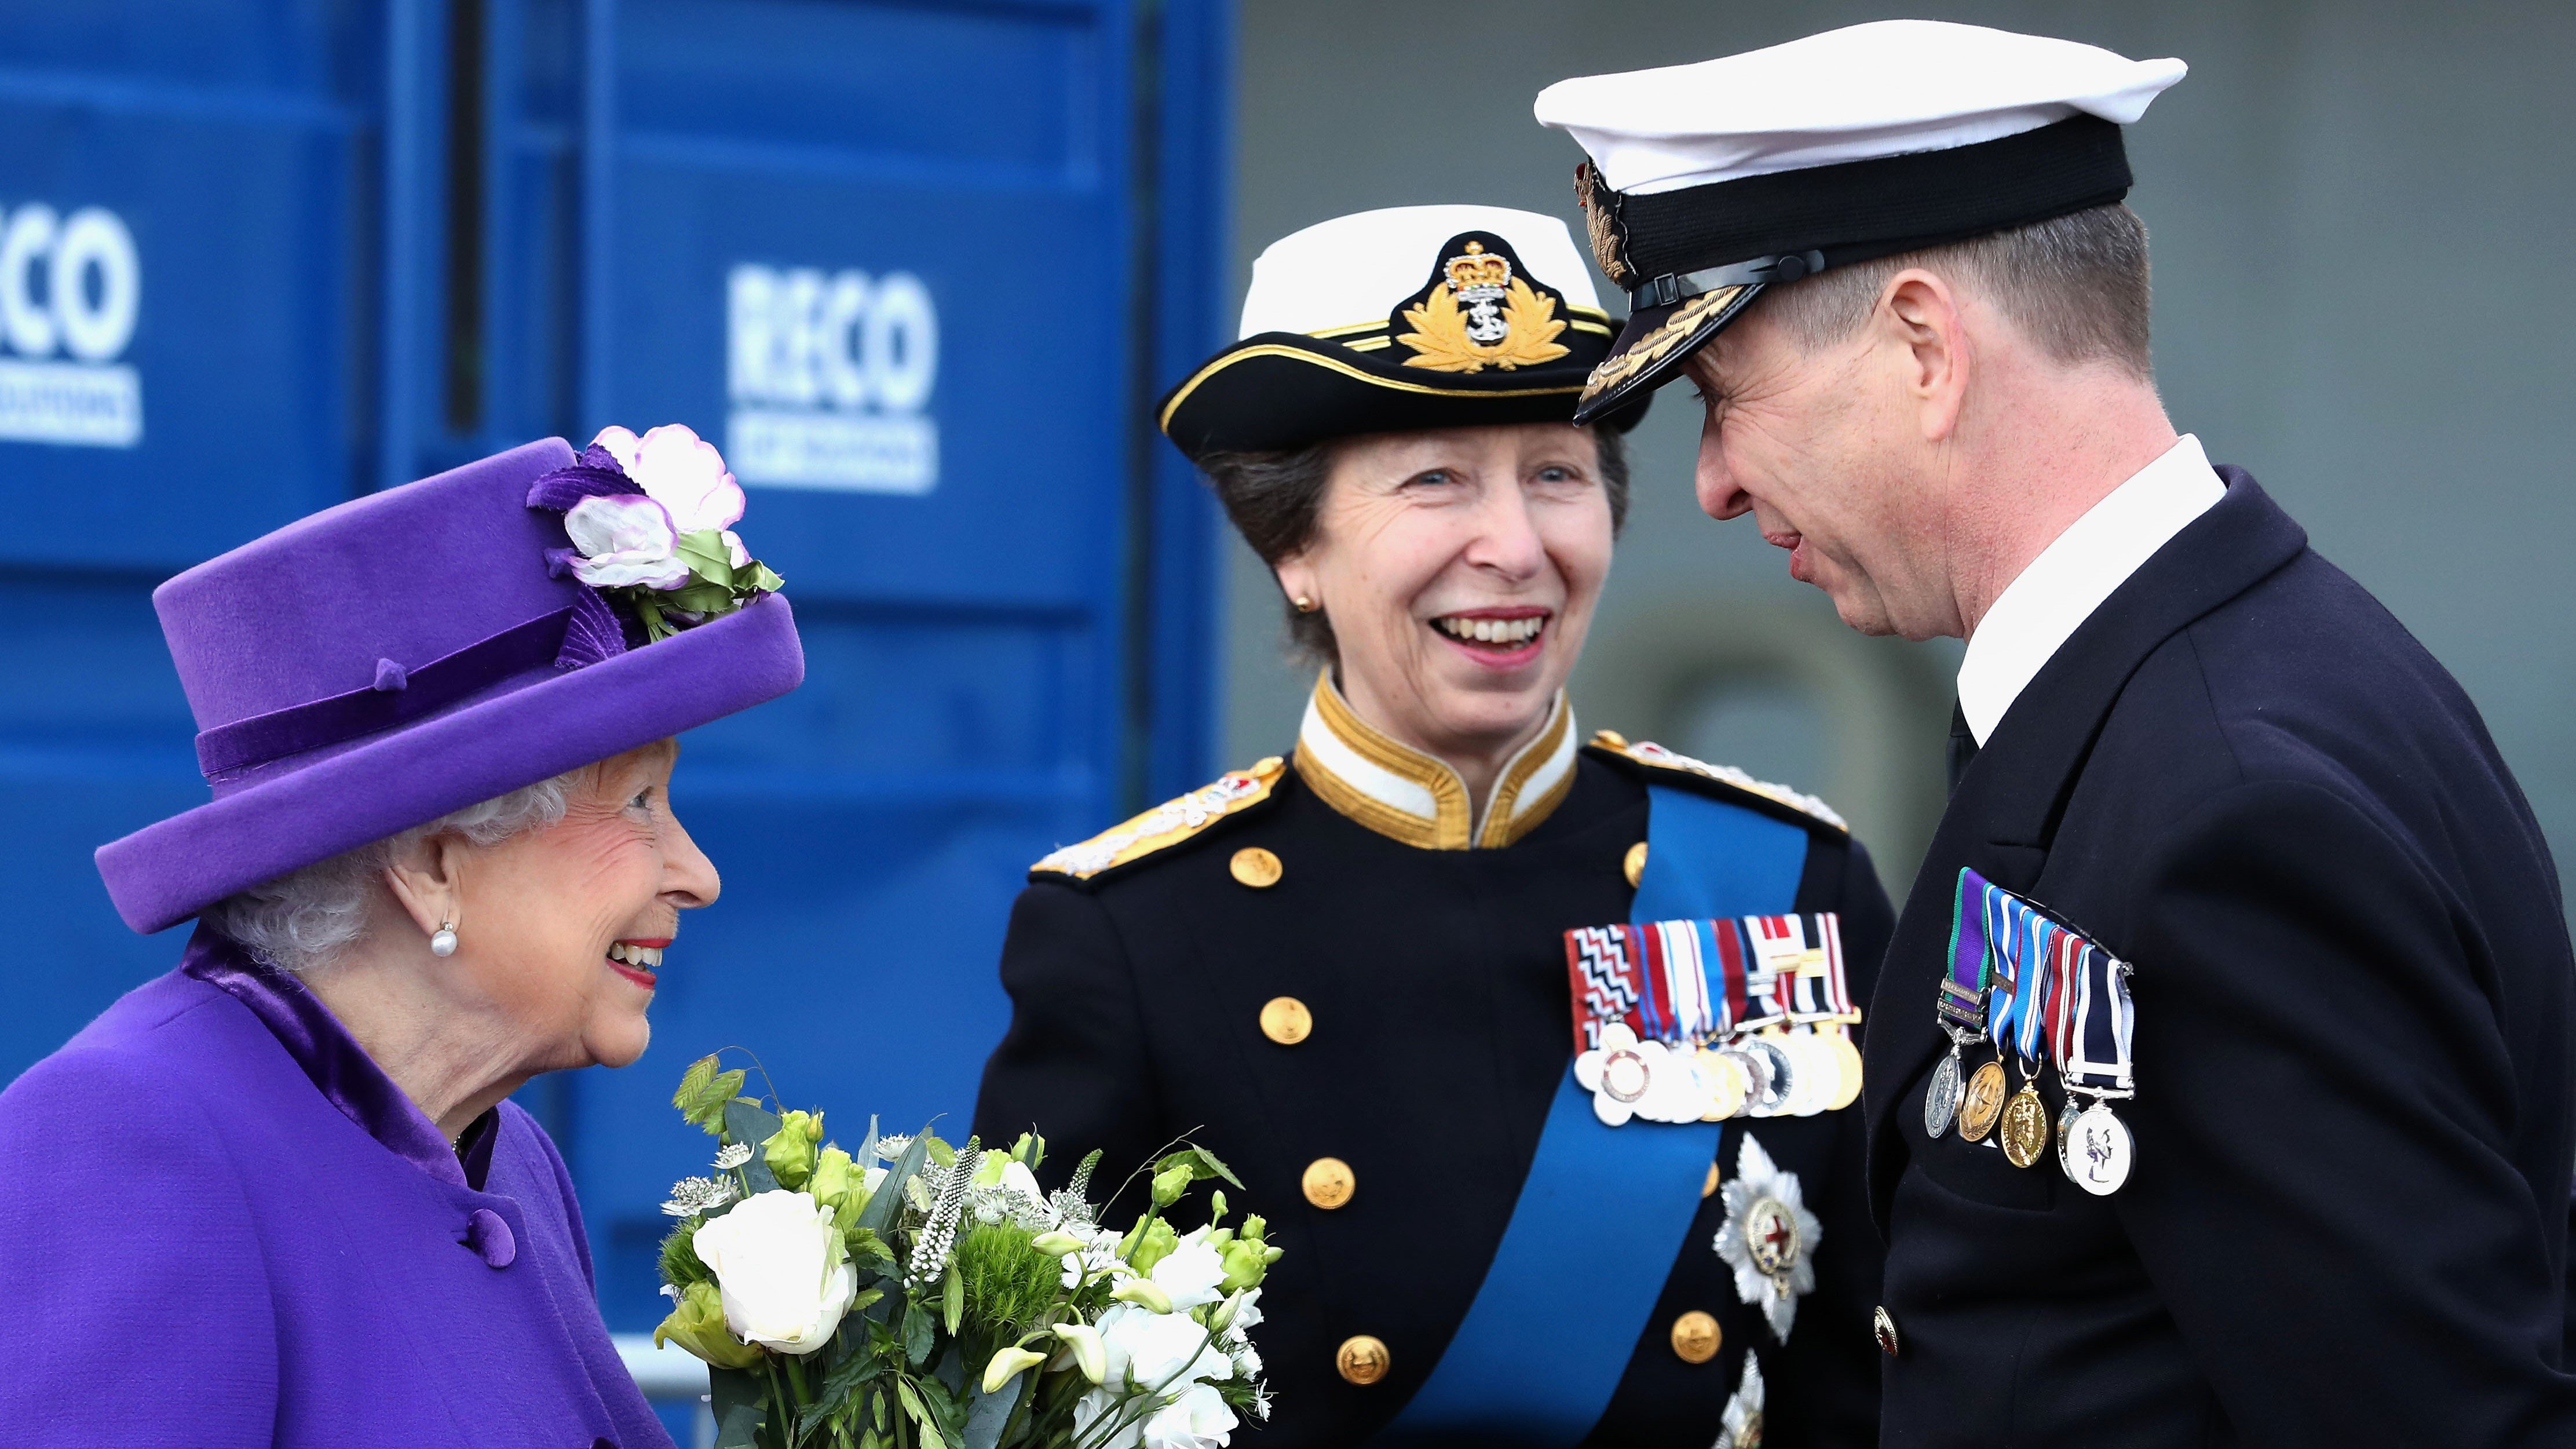 RECO Hoist Hire & Sales provided vertical access for queen Elizabeth at the commissioning event of the HMS Queen Elizabeth